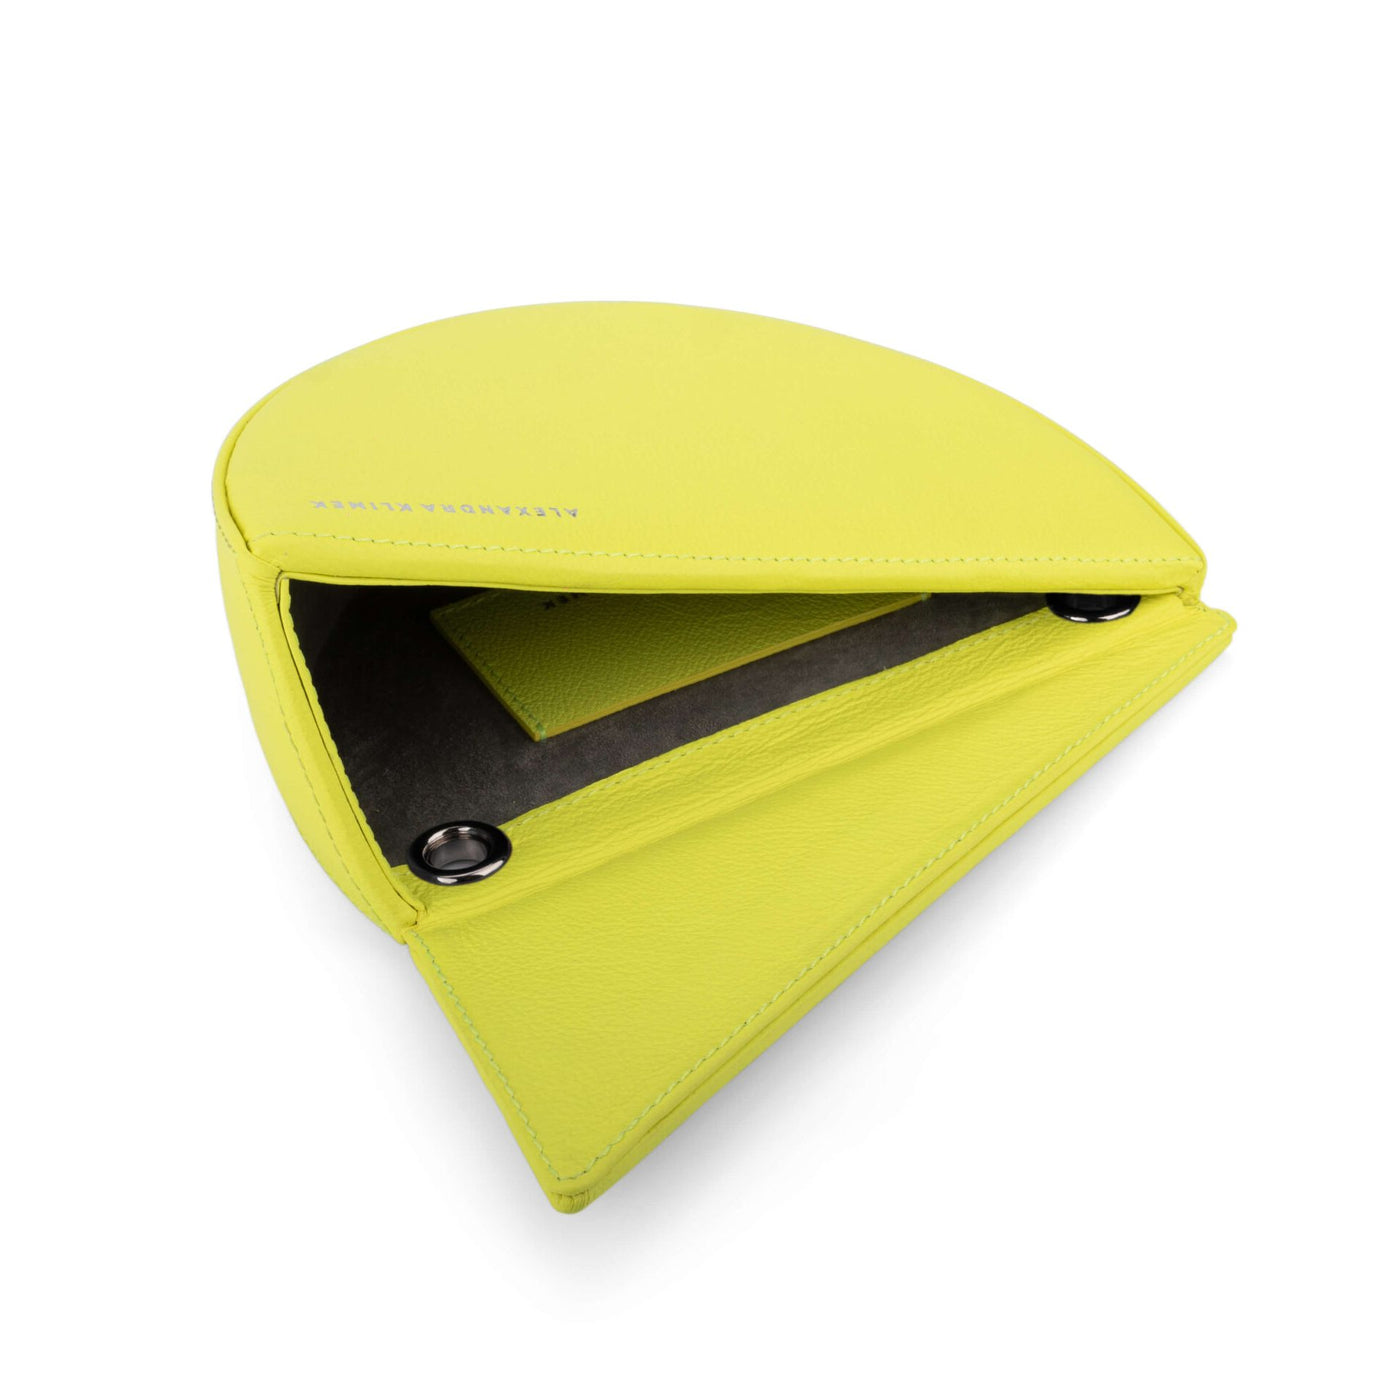 The Spin Bag - Neon Yellow (Made to order)